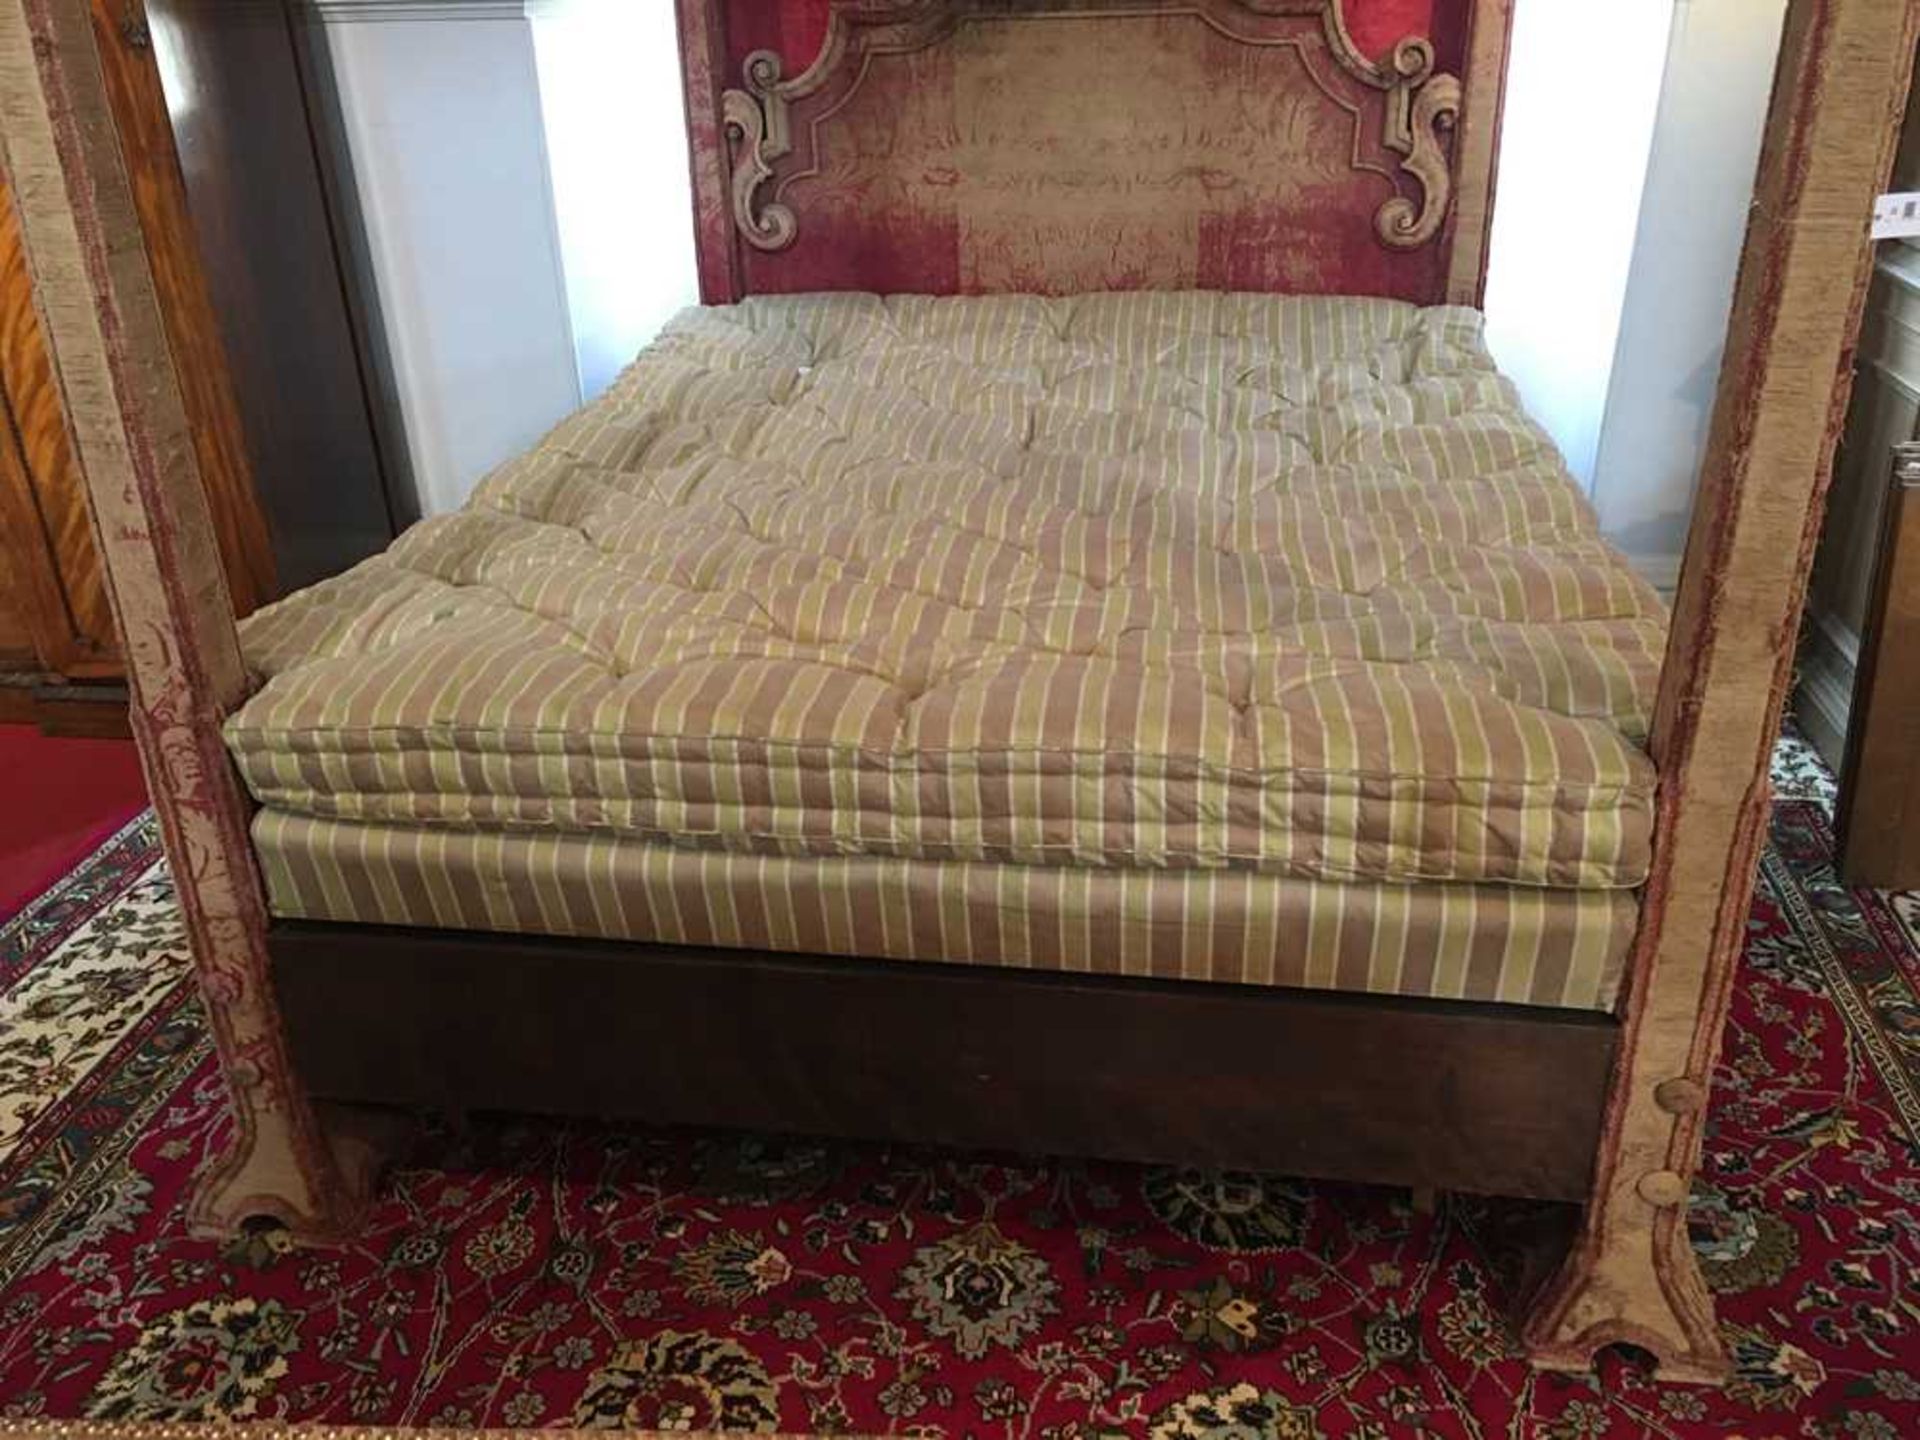 GEORGE I STYLE CRIMSON DAMASK COVERED TESTER BED EARLY 20TH CENTURY, POSSIBLY INCORPORATING EARLIER - Image 6 of 7